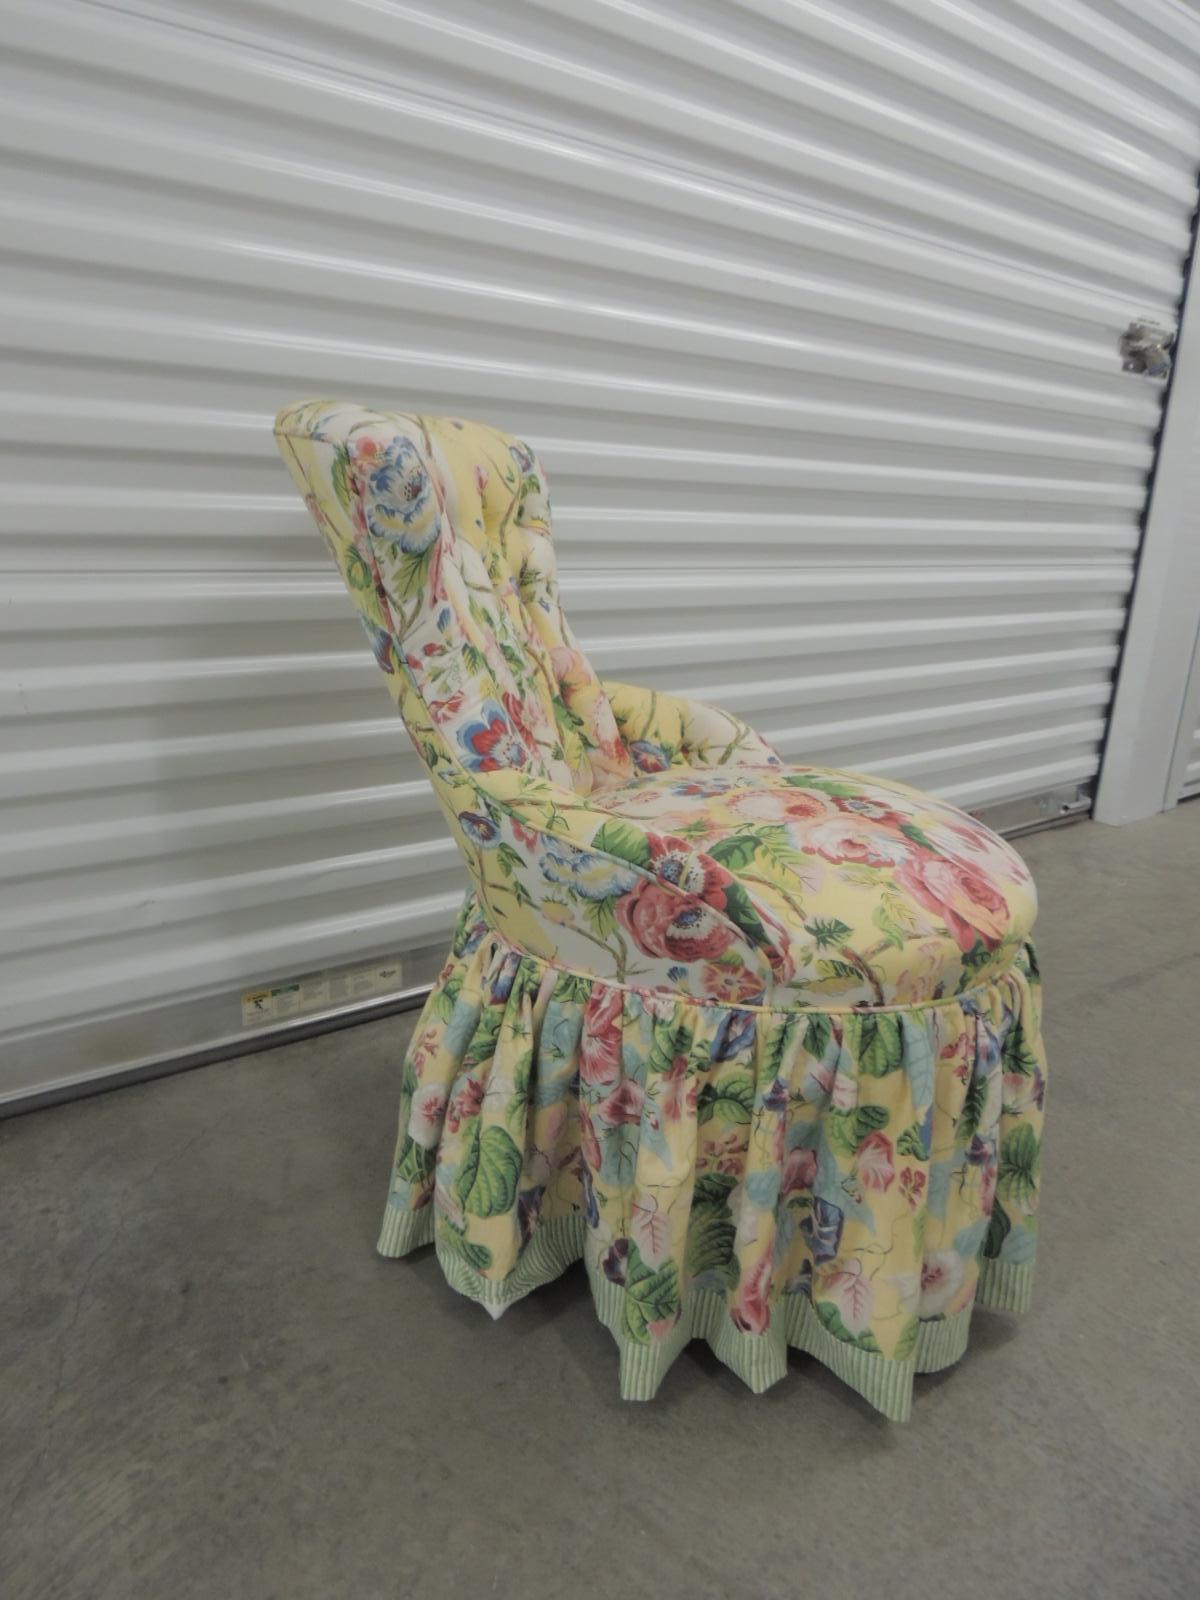 Floral upholstered Victorian Eastlake style slipper chair.
Turned wood legs with original brass casters (in the front legs only)
Newly re-upholster with floral patter cotton fabric and ruffled skirt.
Tight seat and tufted back.
Size: SD 18